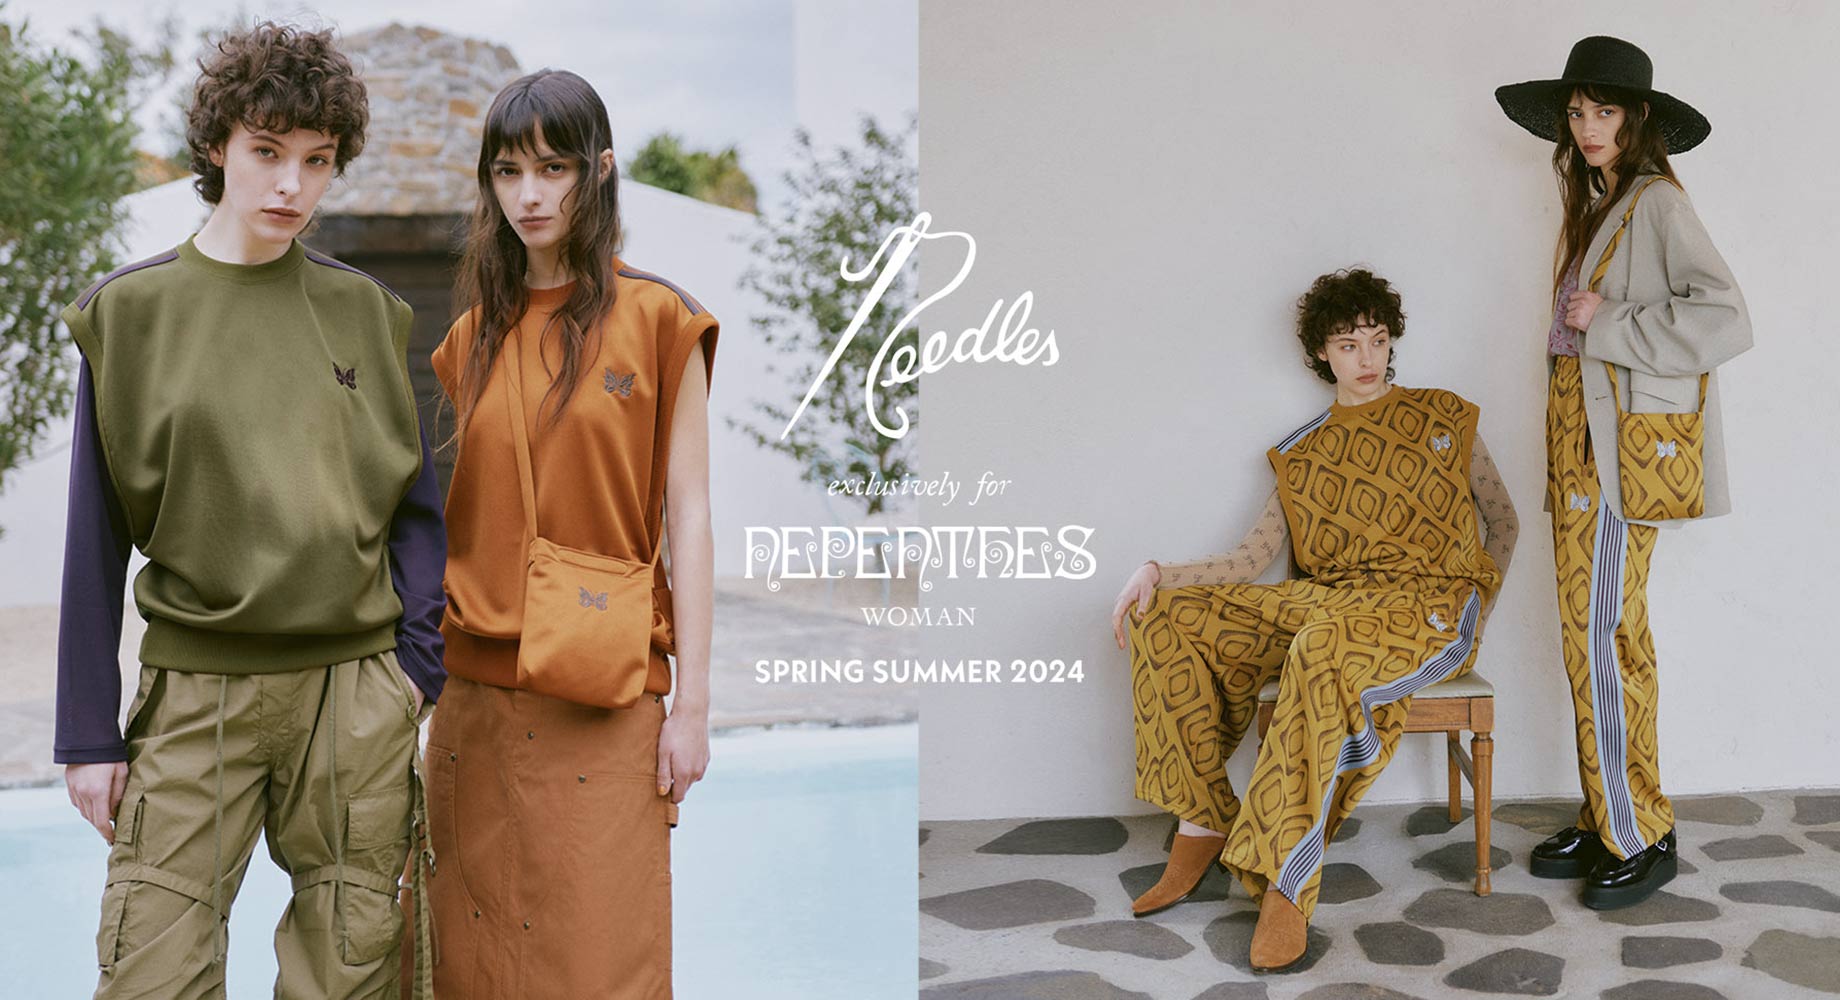 SPECIAL RELEASE for NEPENTHES WOMAN STORES - SPRING SUMMER 2024 DROP2 Releasing on 4/20（SAT）11:00 JST